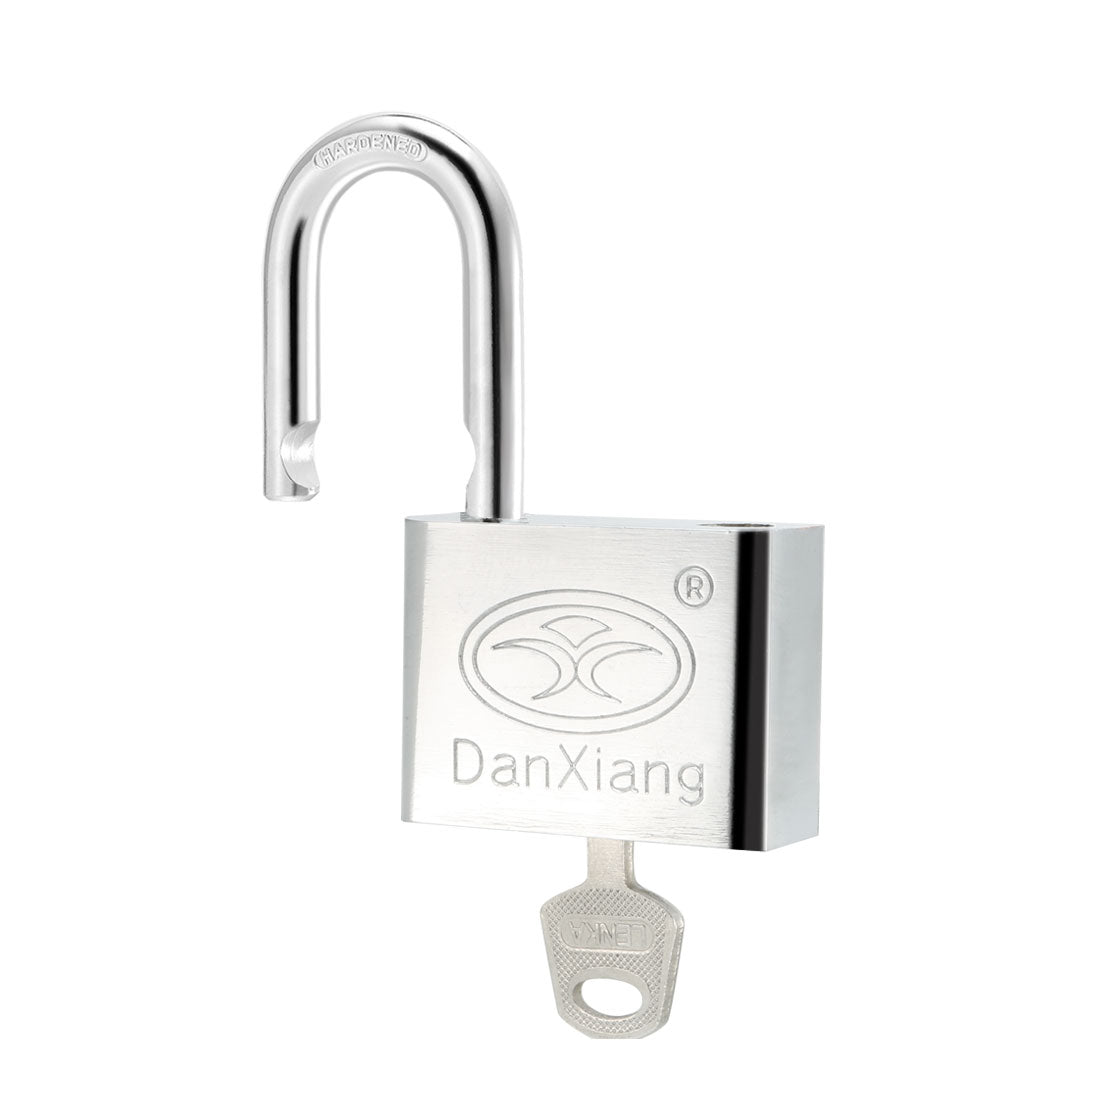 uxcell Uxcell 50mm Body Wide Stainless Steel Padlock Chrome Finish Harden Shackle, Keyed Different